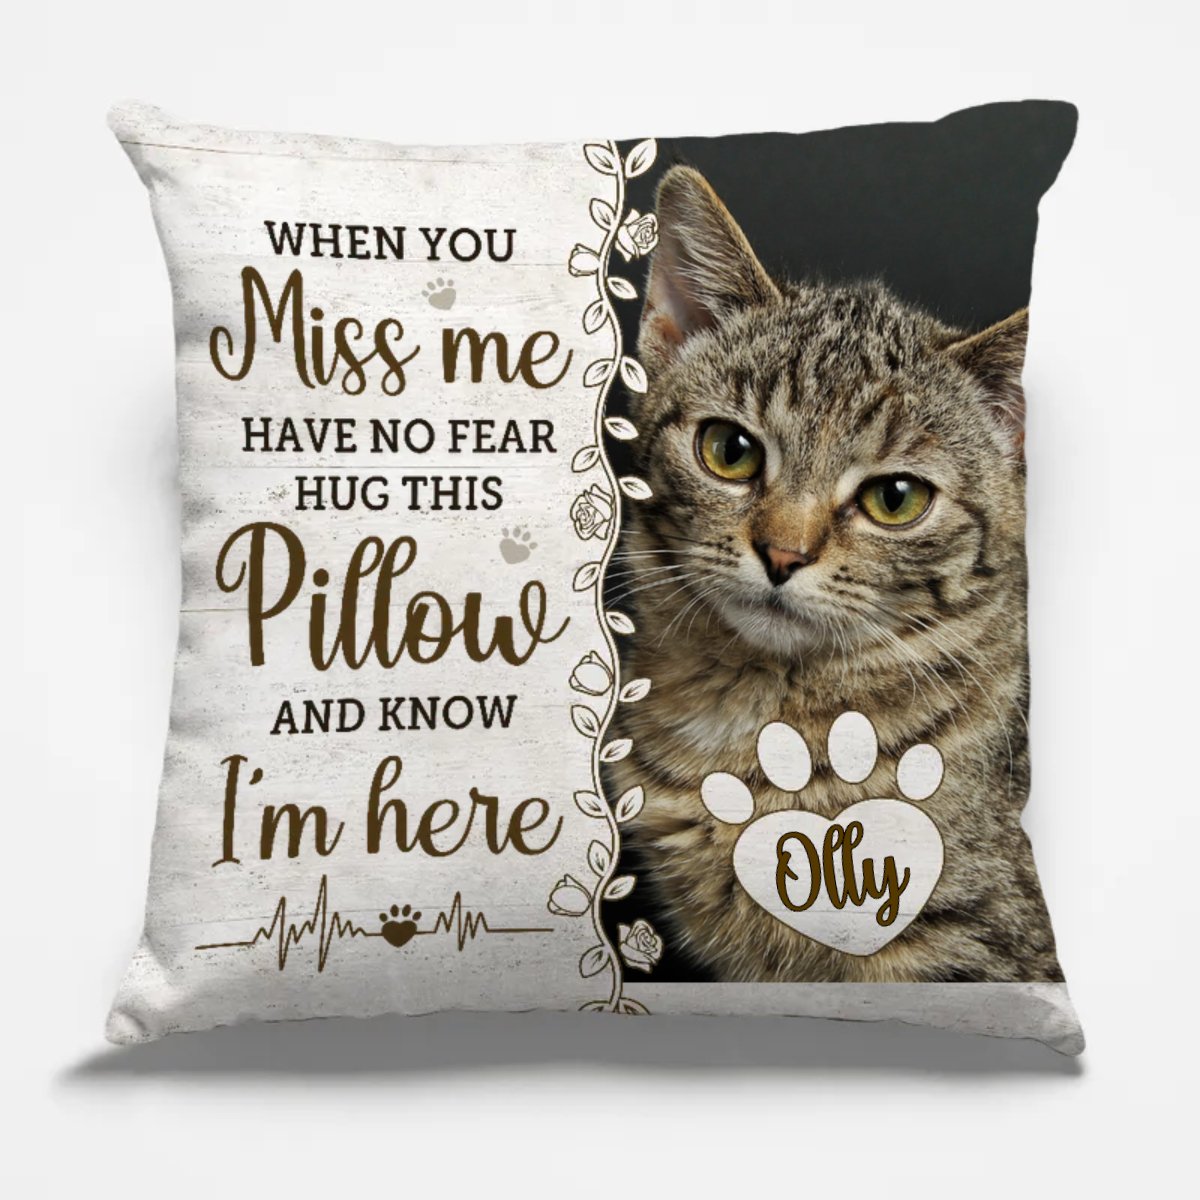 Pet Lovers - When You Miss Me Have No Fear Hug This Pillow And Know I'am Here - Personalized Pillow (TL) - The Next Custom Gift